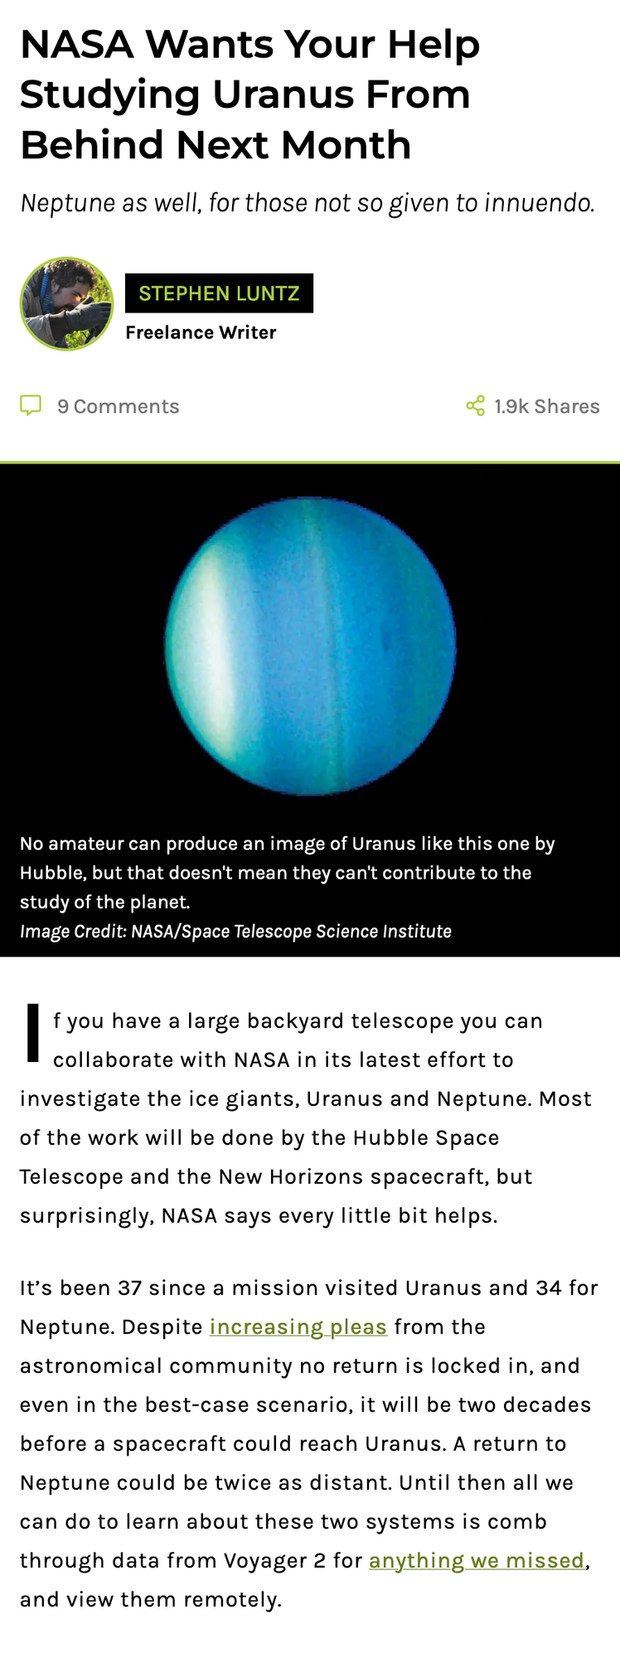 NASA Wants Your Help Studying Uranus From Behind Next Month - meme